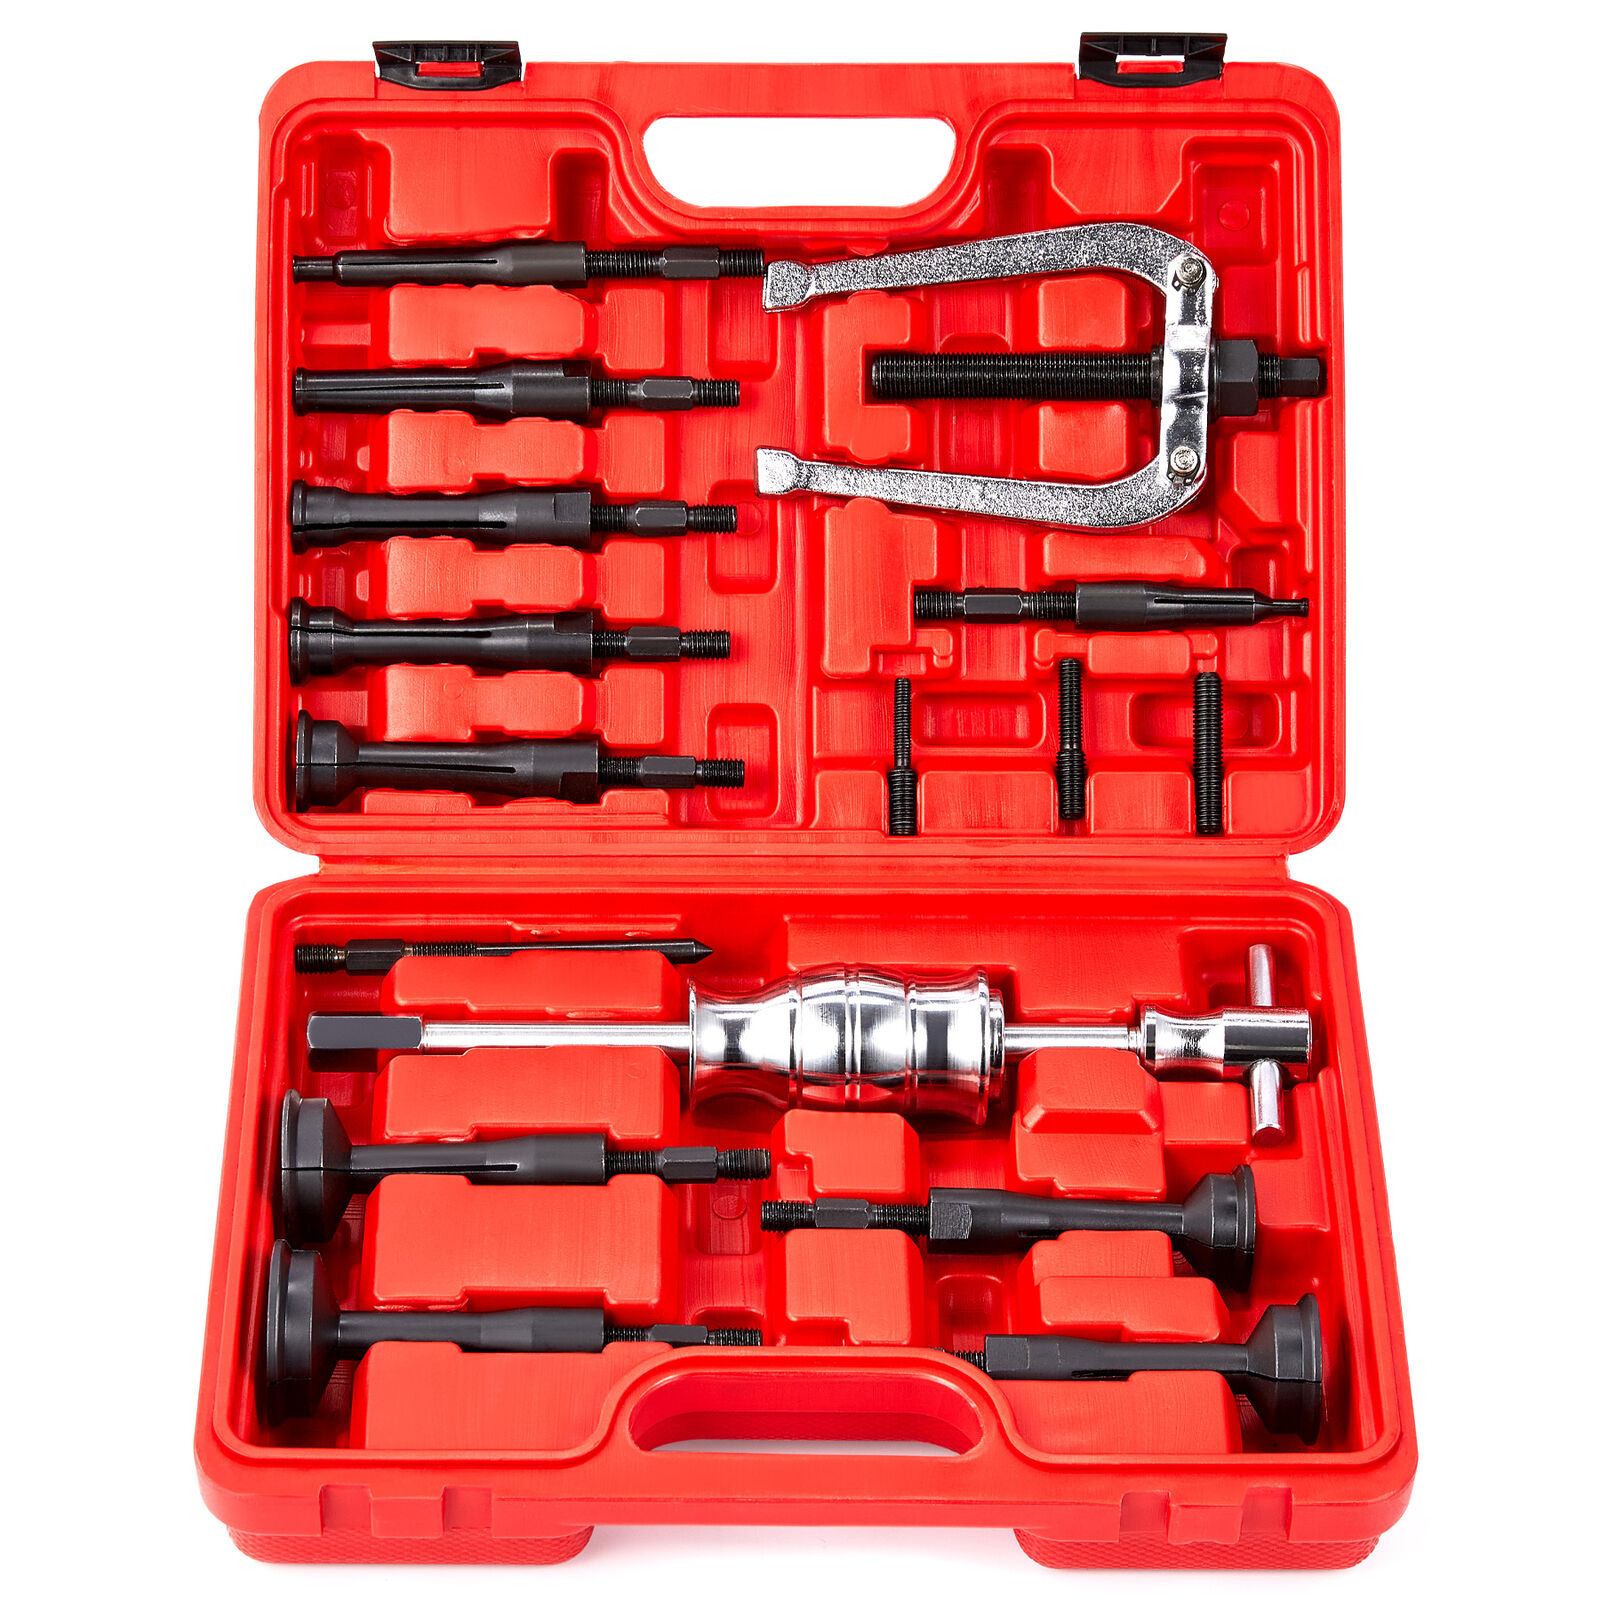 16Pcs Blind Hole Pilot Internal Extractor/Remover Bearing Puller Set w/ Red Case